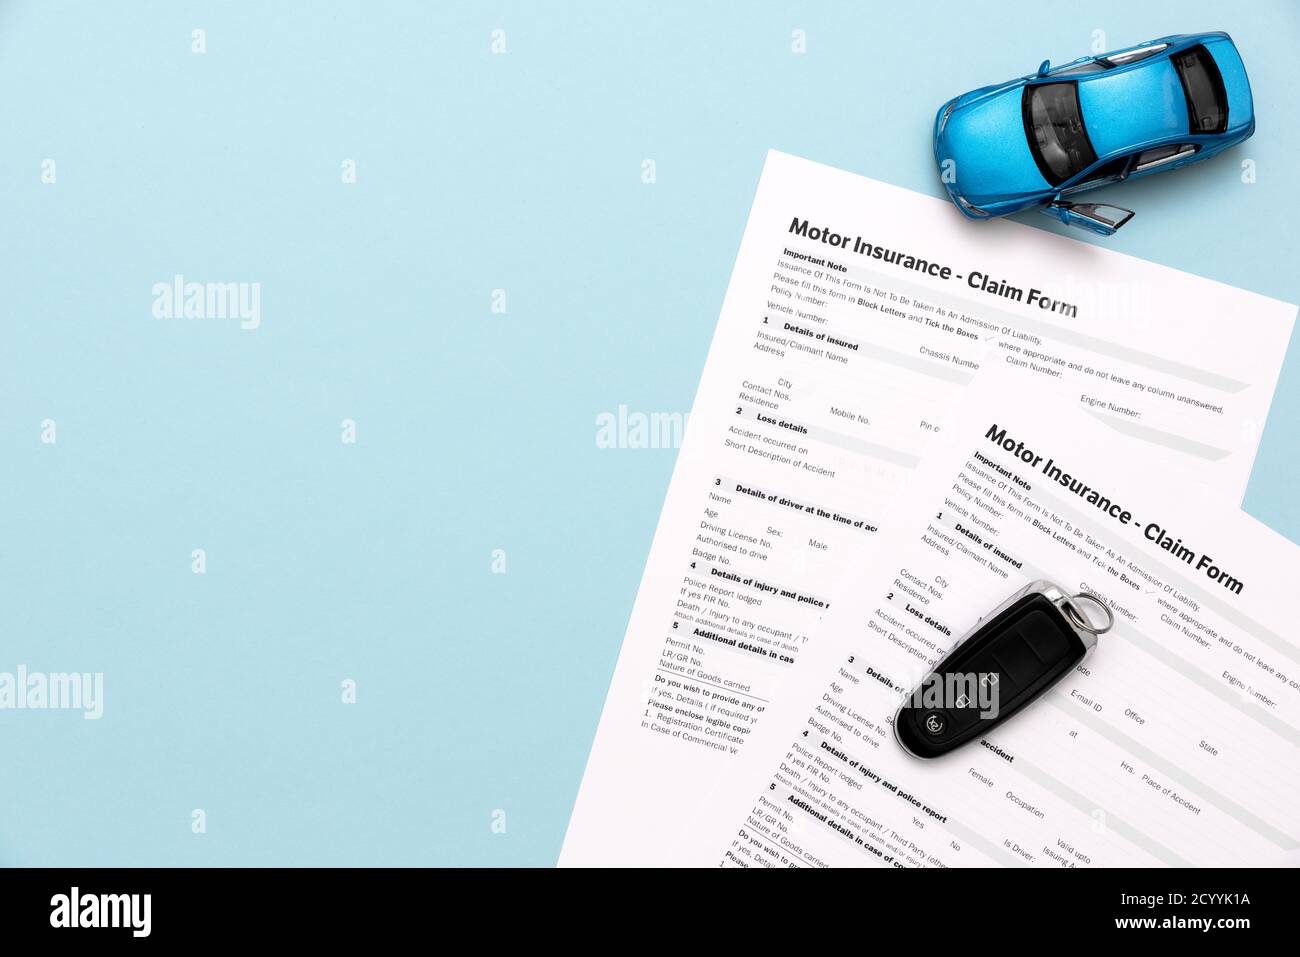 Car insurance, insurance contract and car keys on a blue background Stock Photo